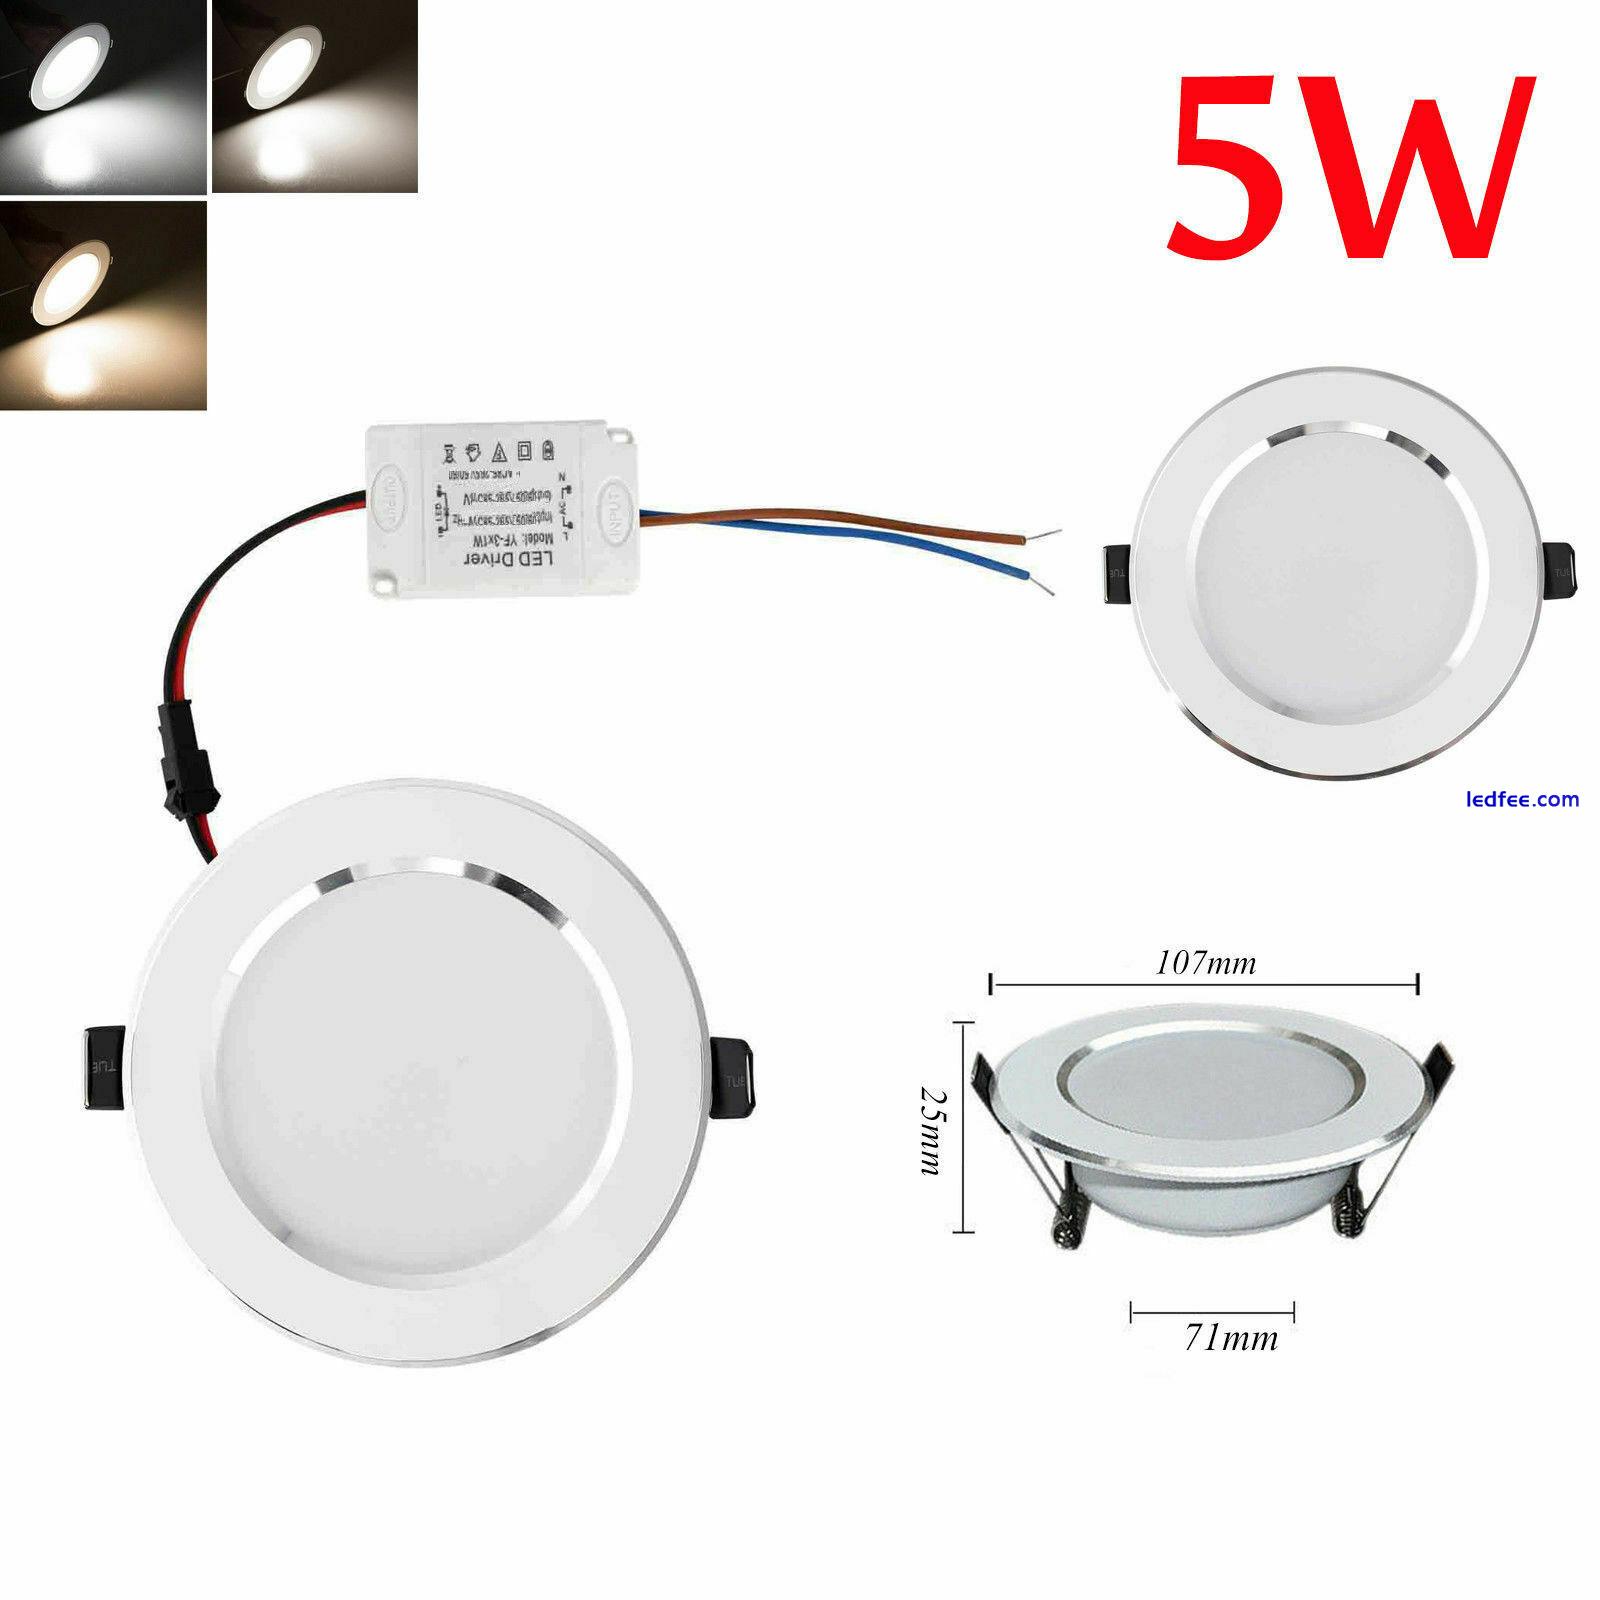 Dimmable LED Recessed Ceiling Light Panel Downlight Lamps Chandelier 3W 5W 7W 9W 5 